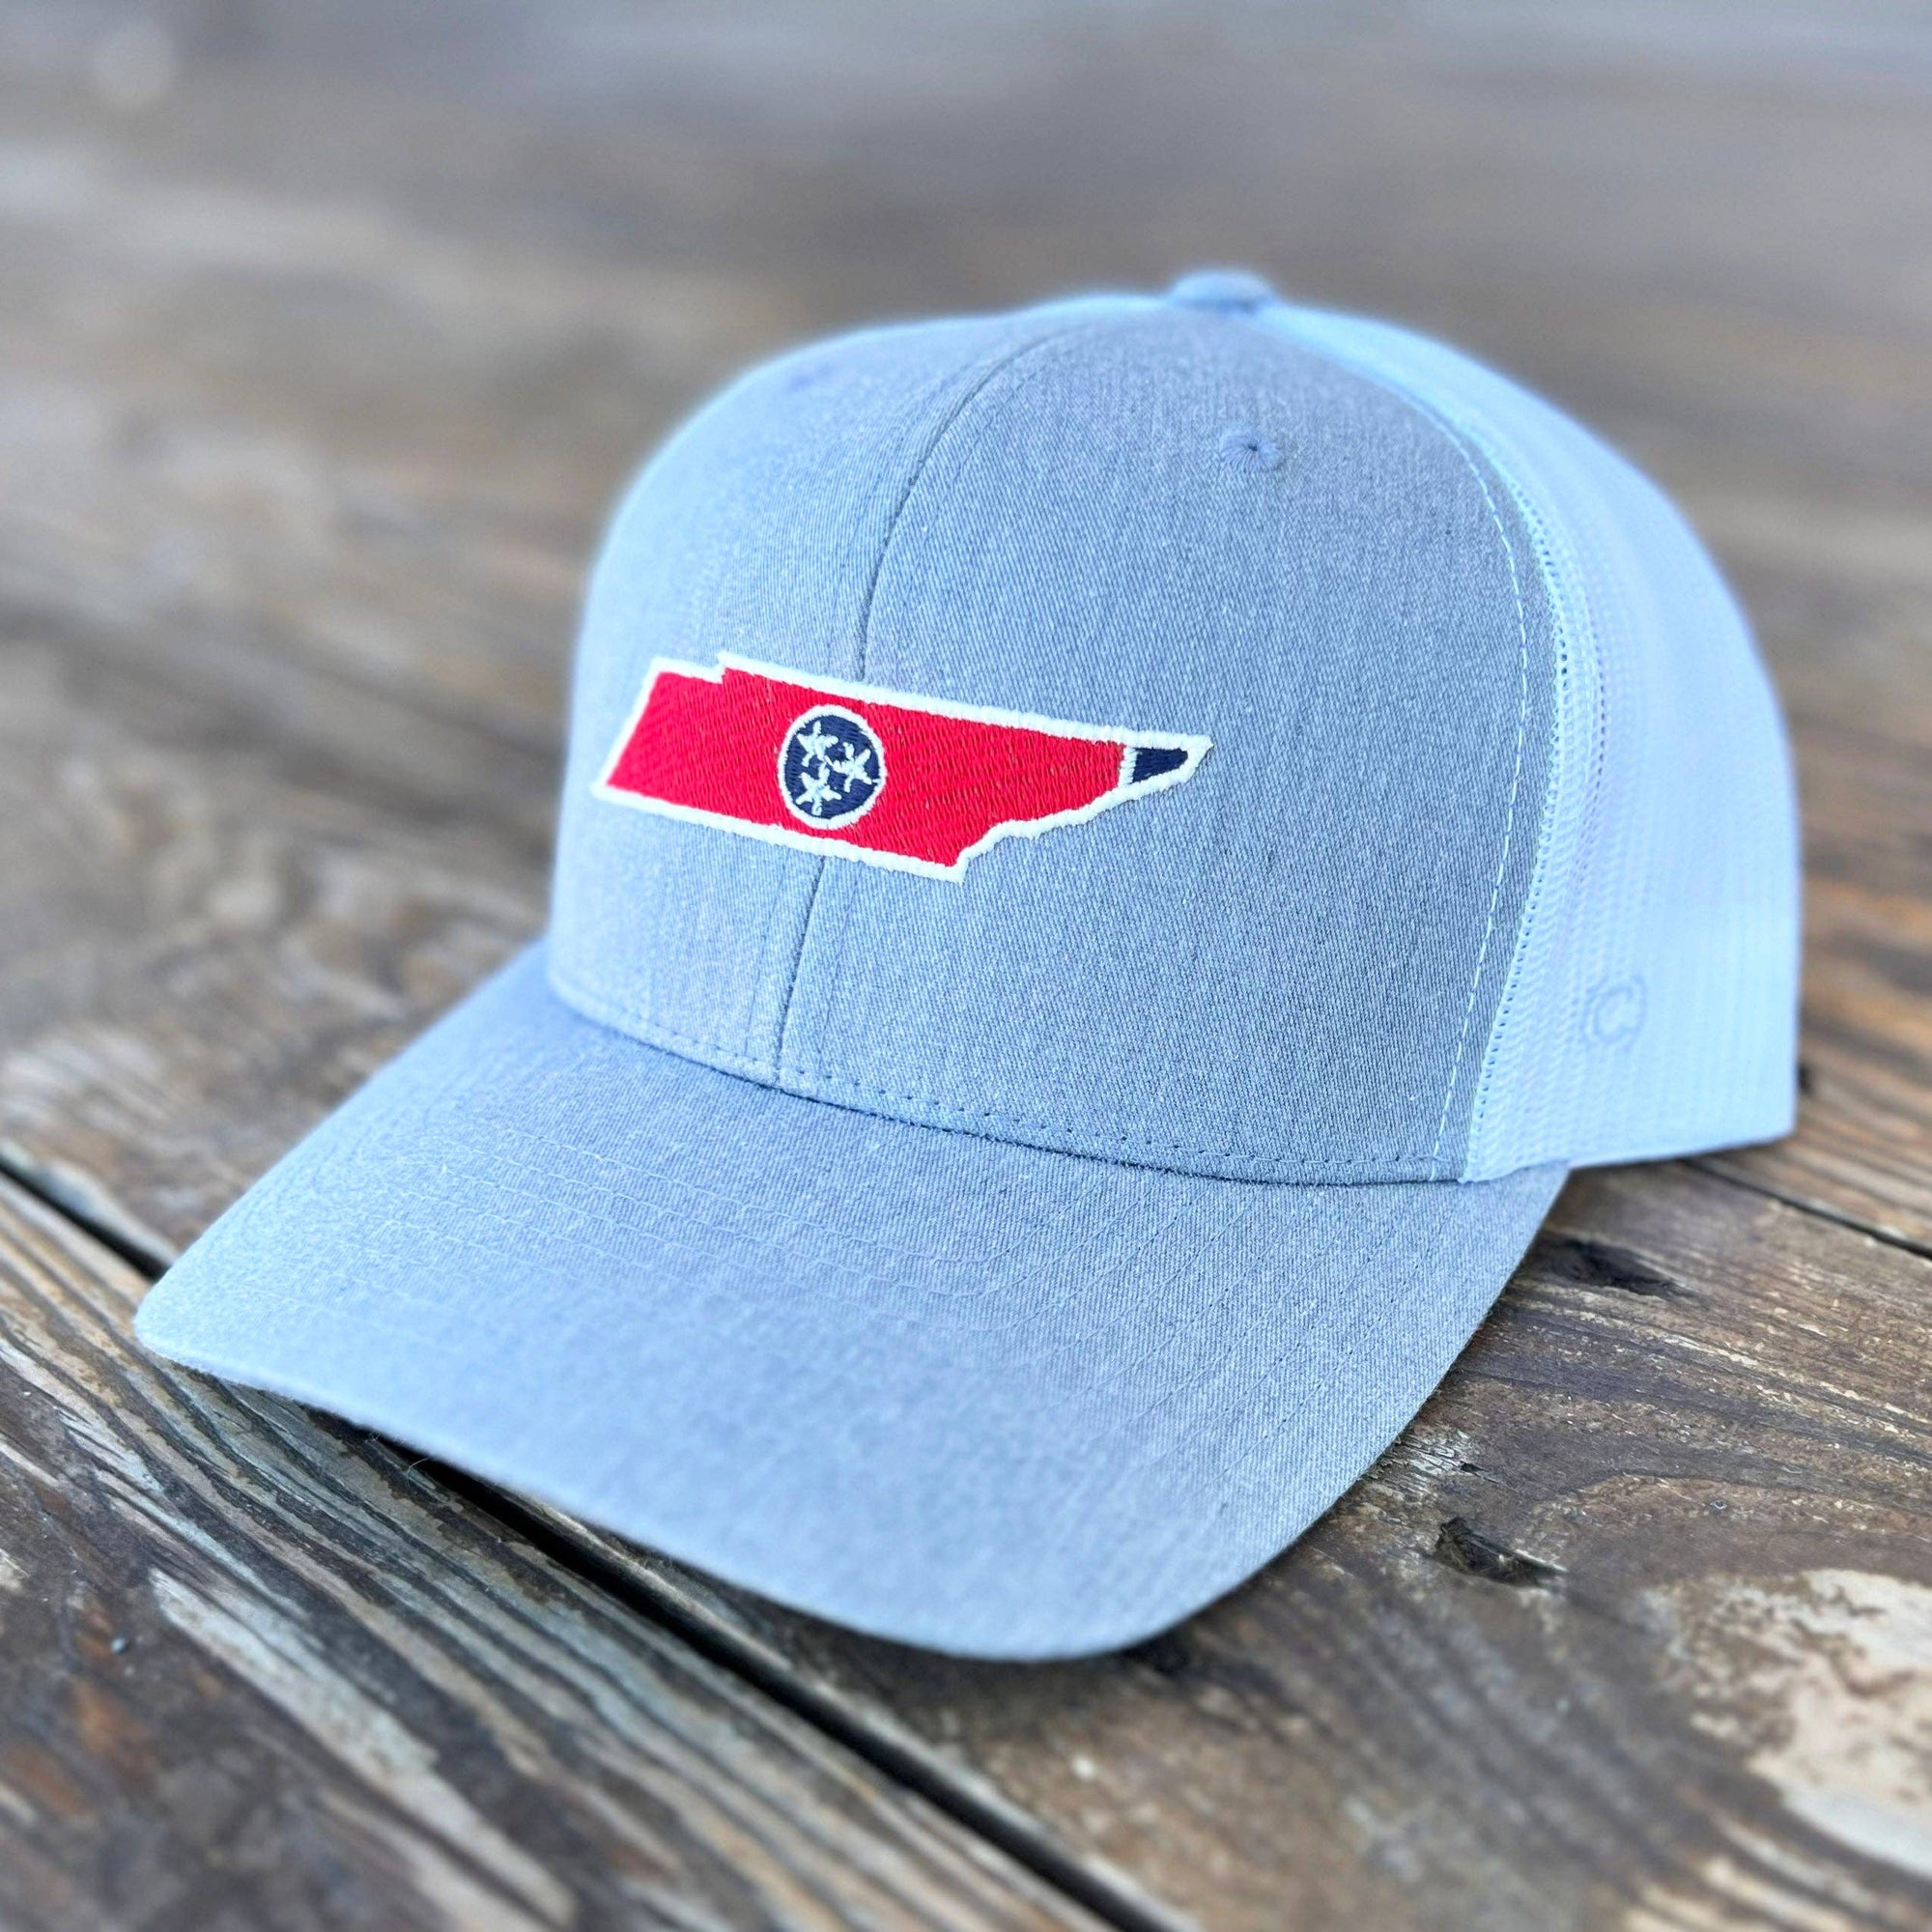 TENNESSEE - STATE FLAG HATS: Grey & White Trucker